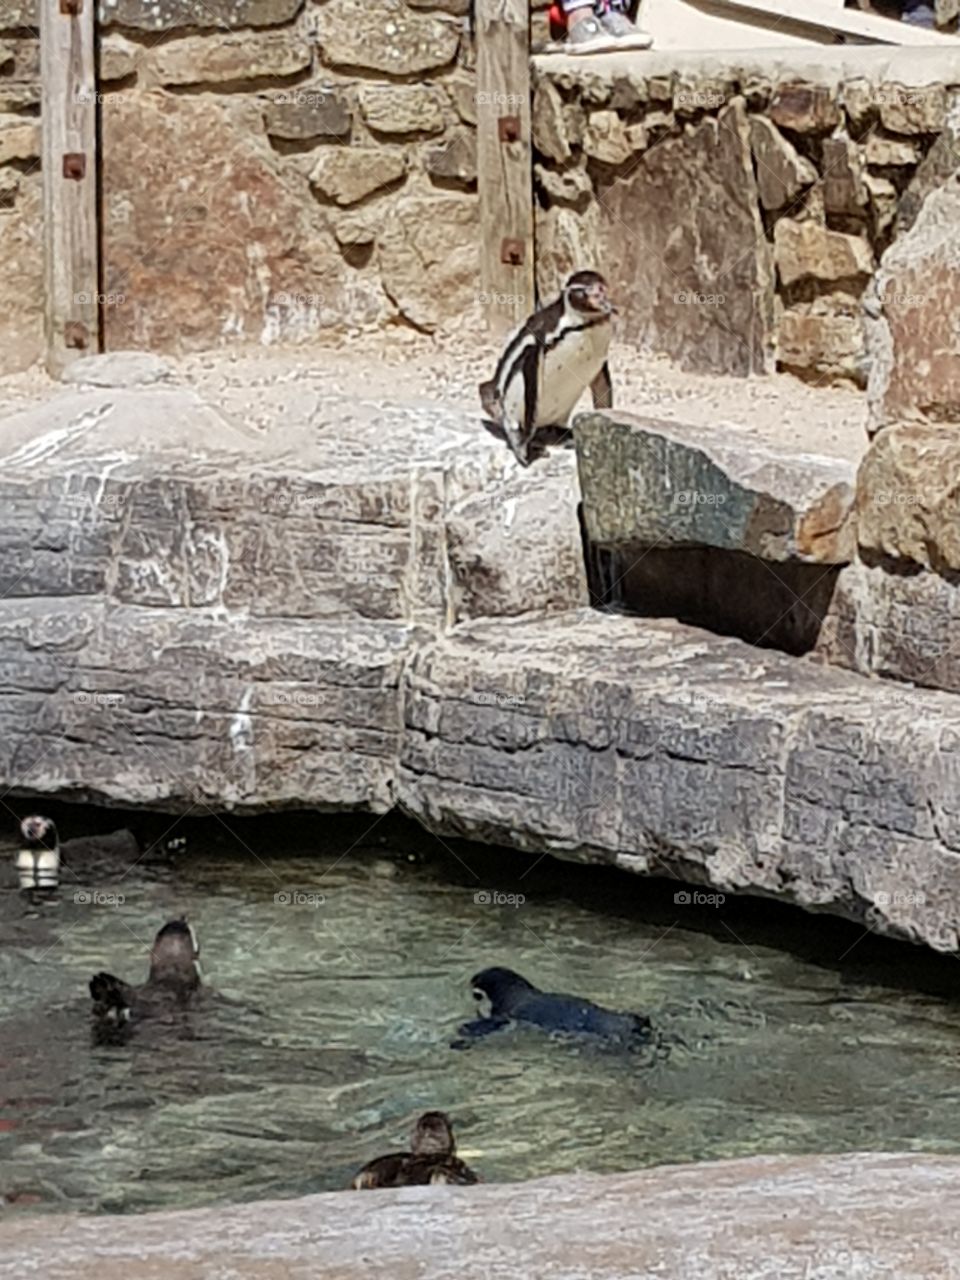 Penguin at Paradise Park in Hayle, Cornwall